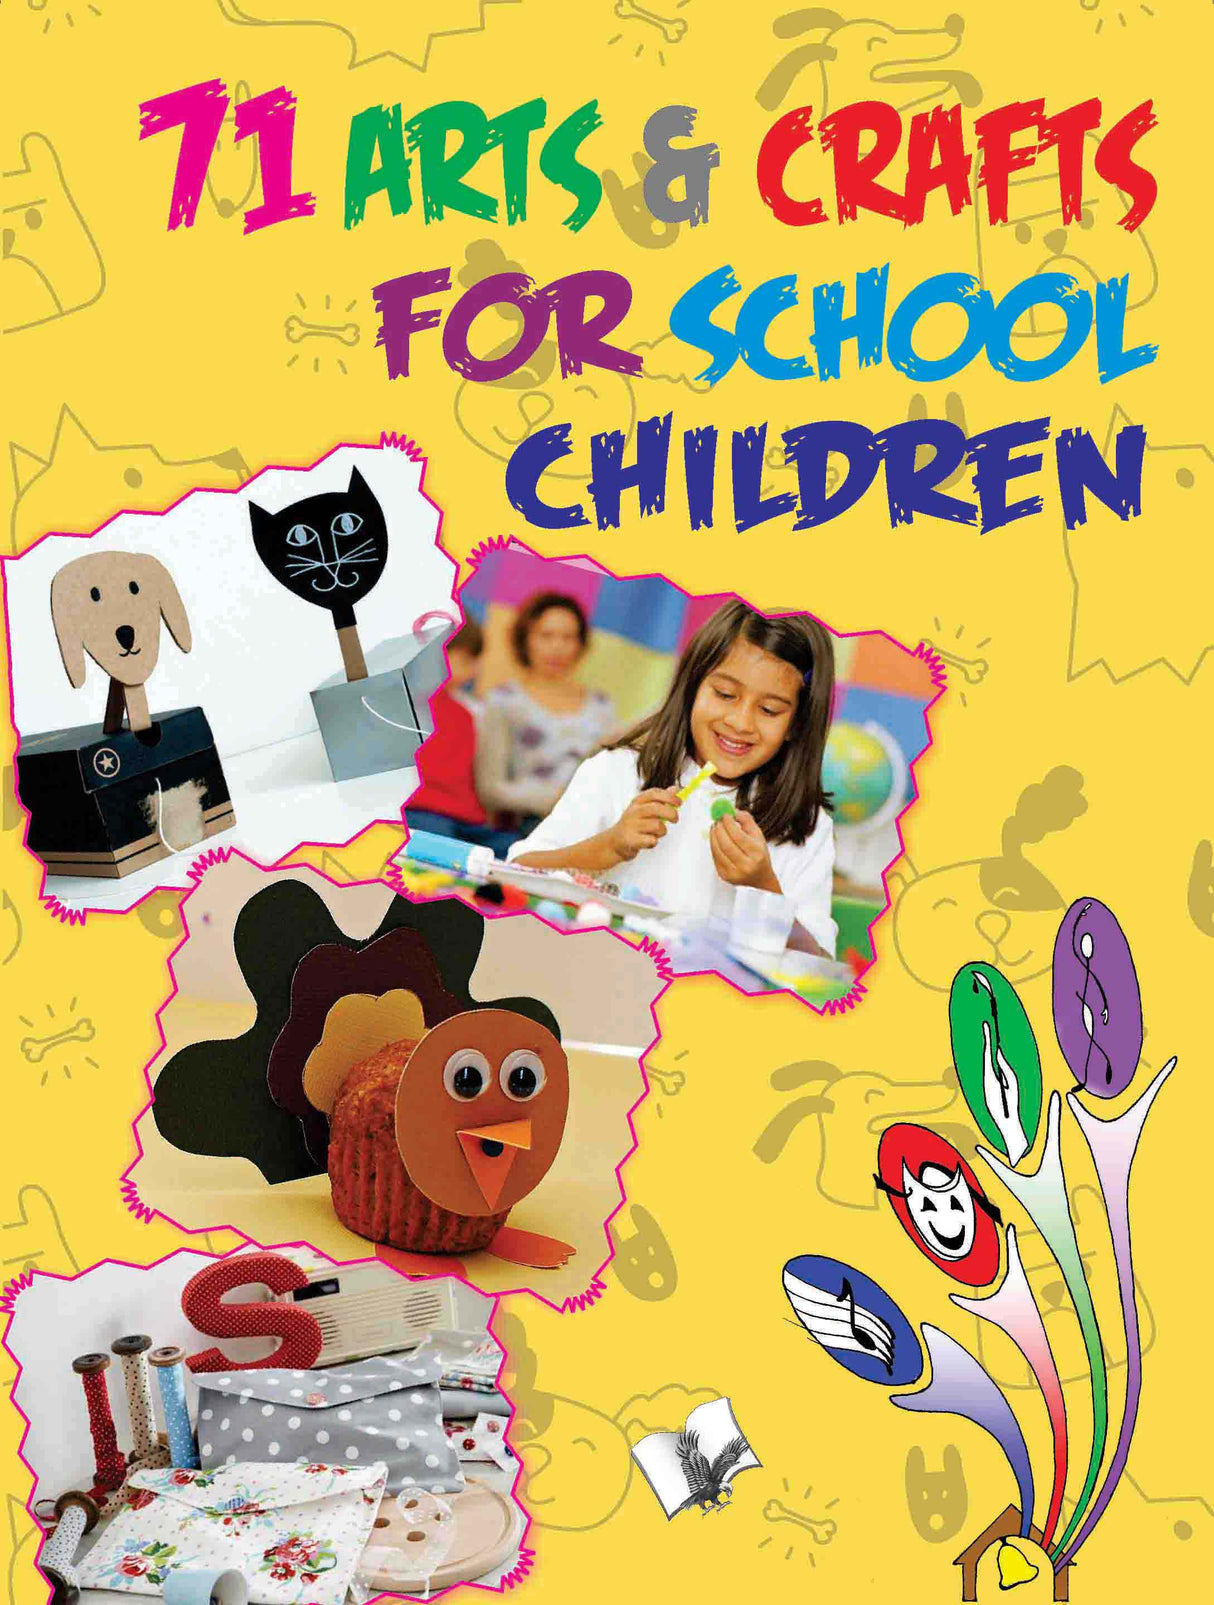 71 Arts & Crafts For School Children : Practice is the only way to master an art